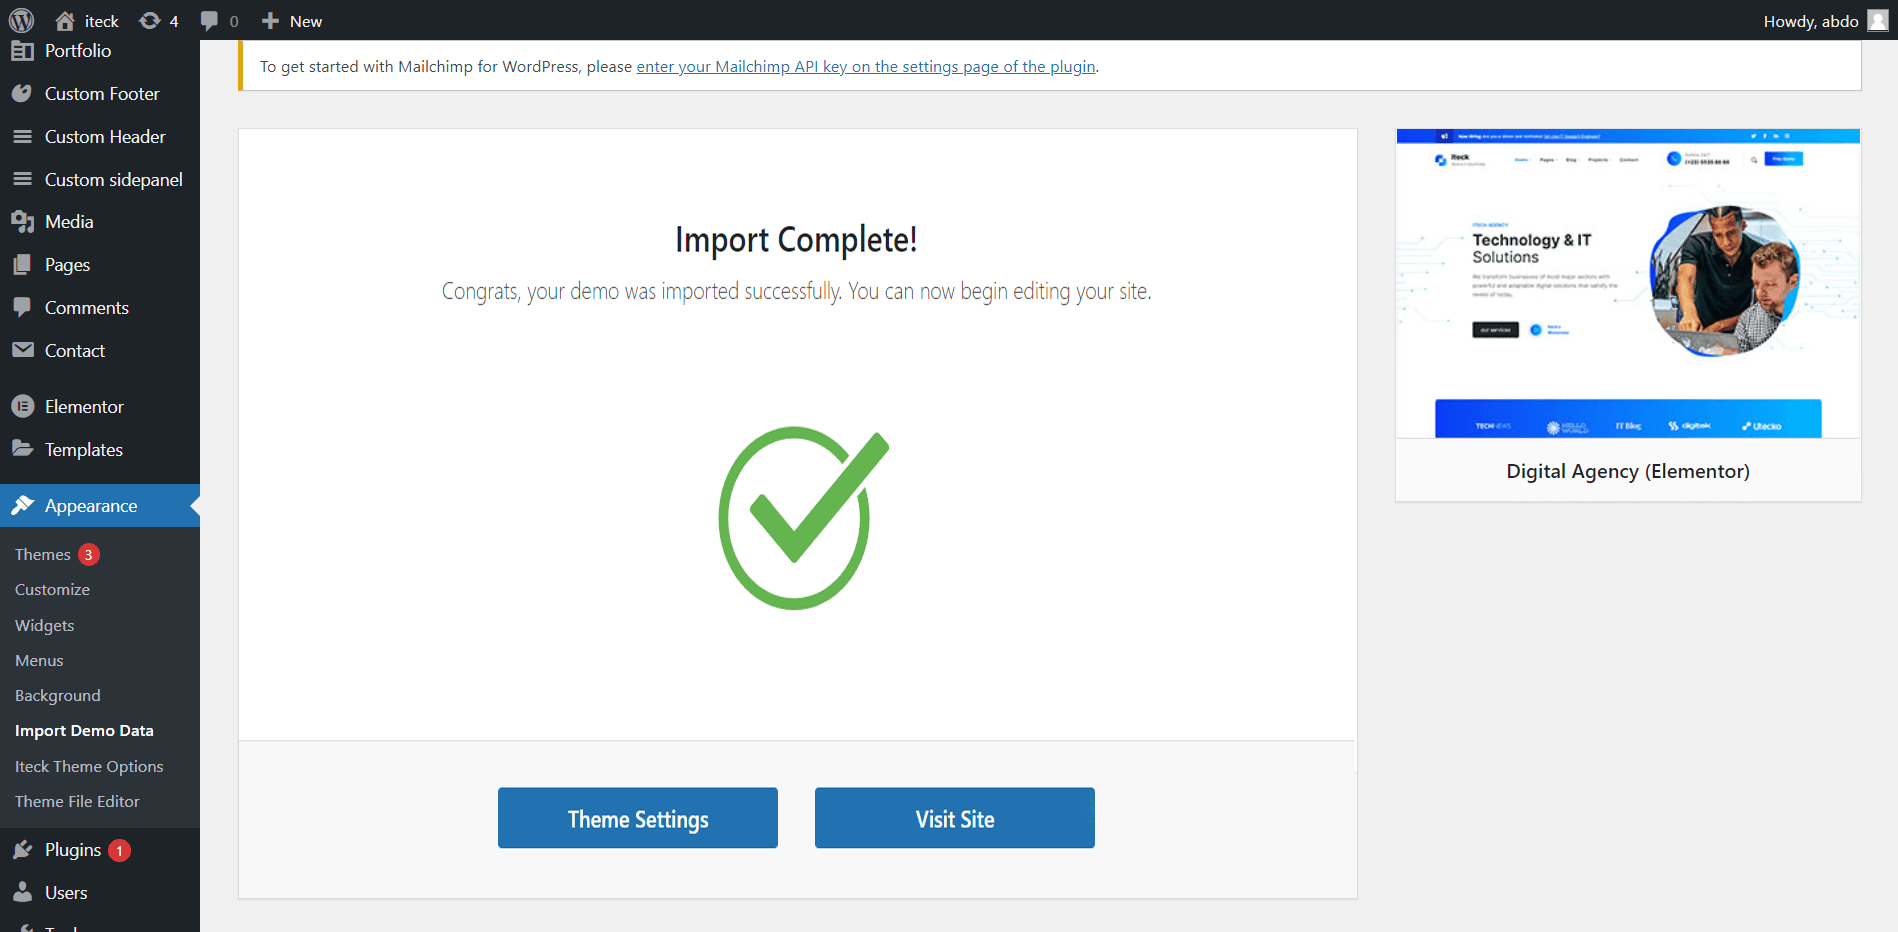 Choose all file and click the import demo data button